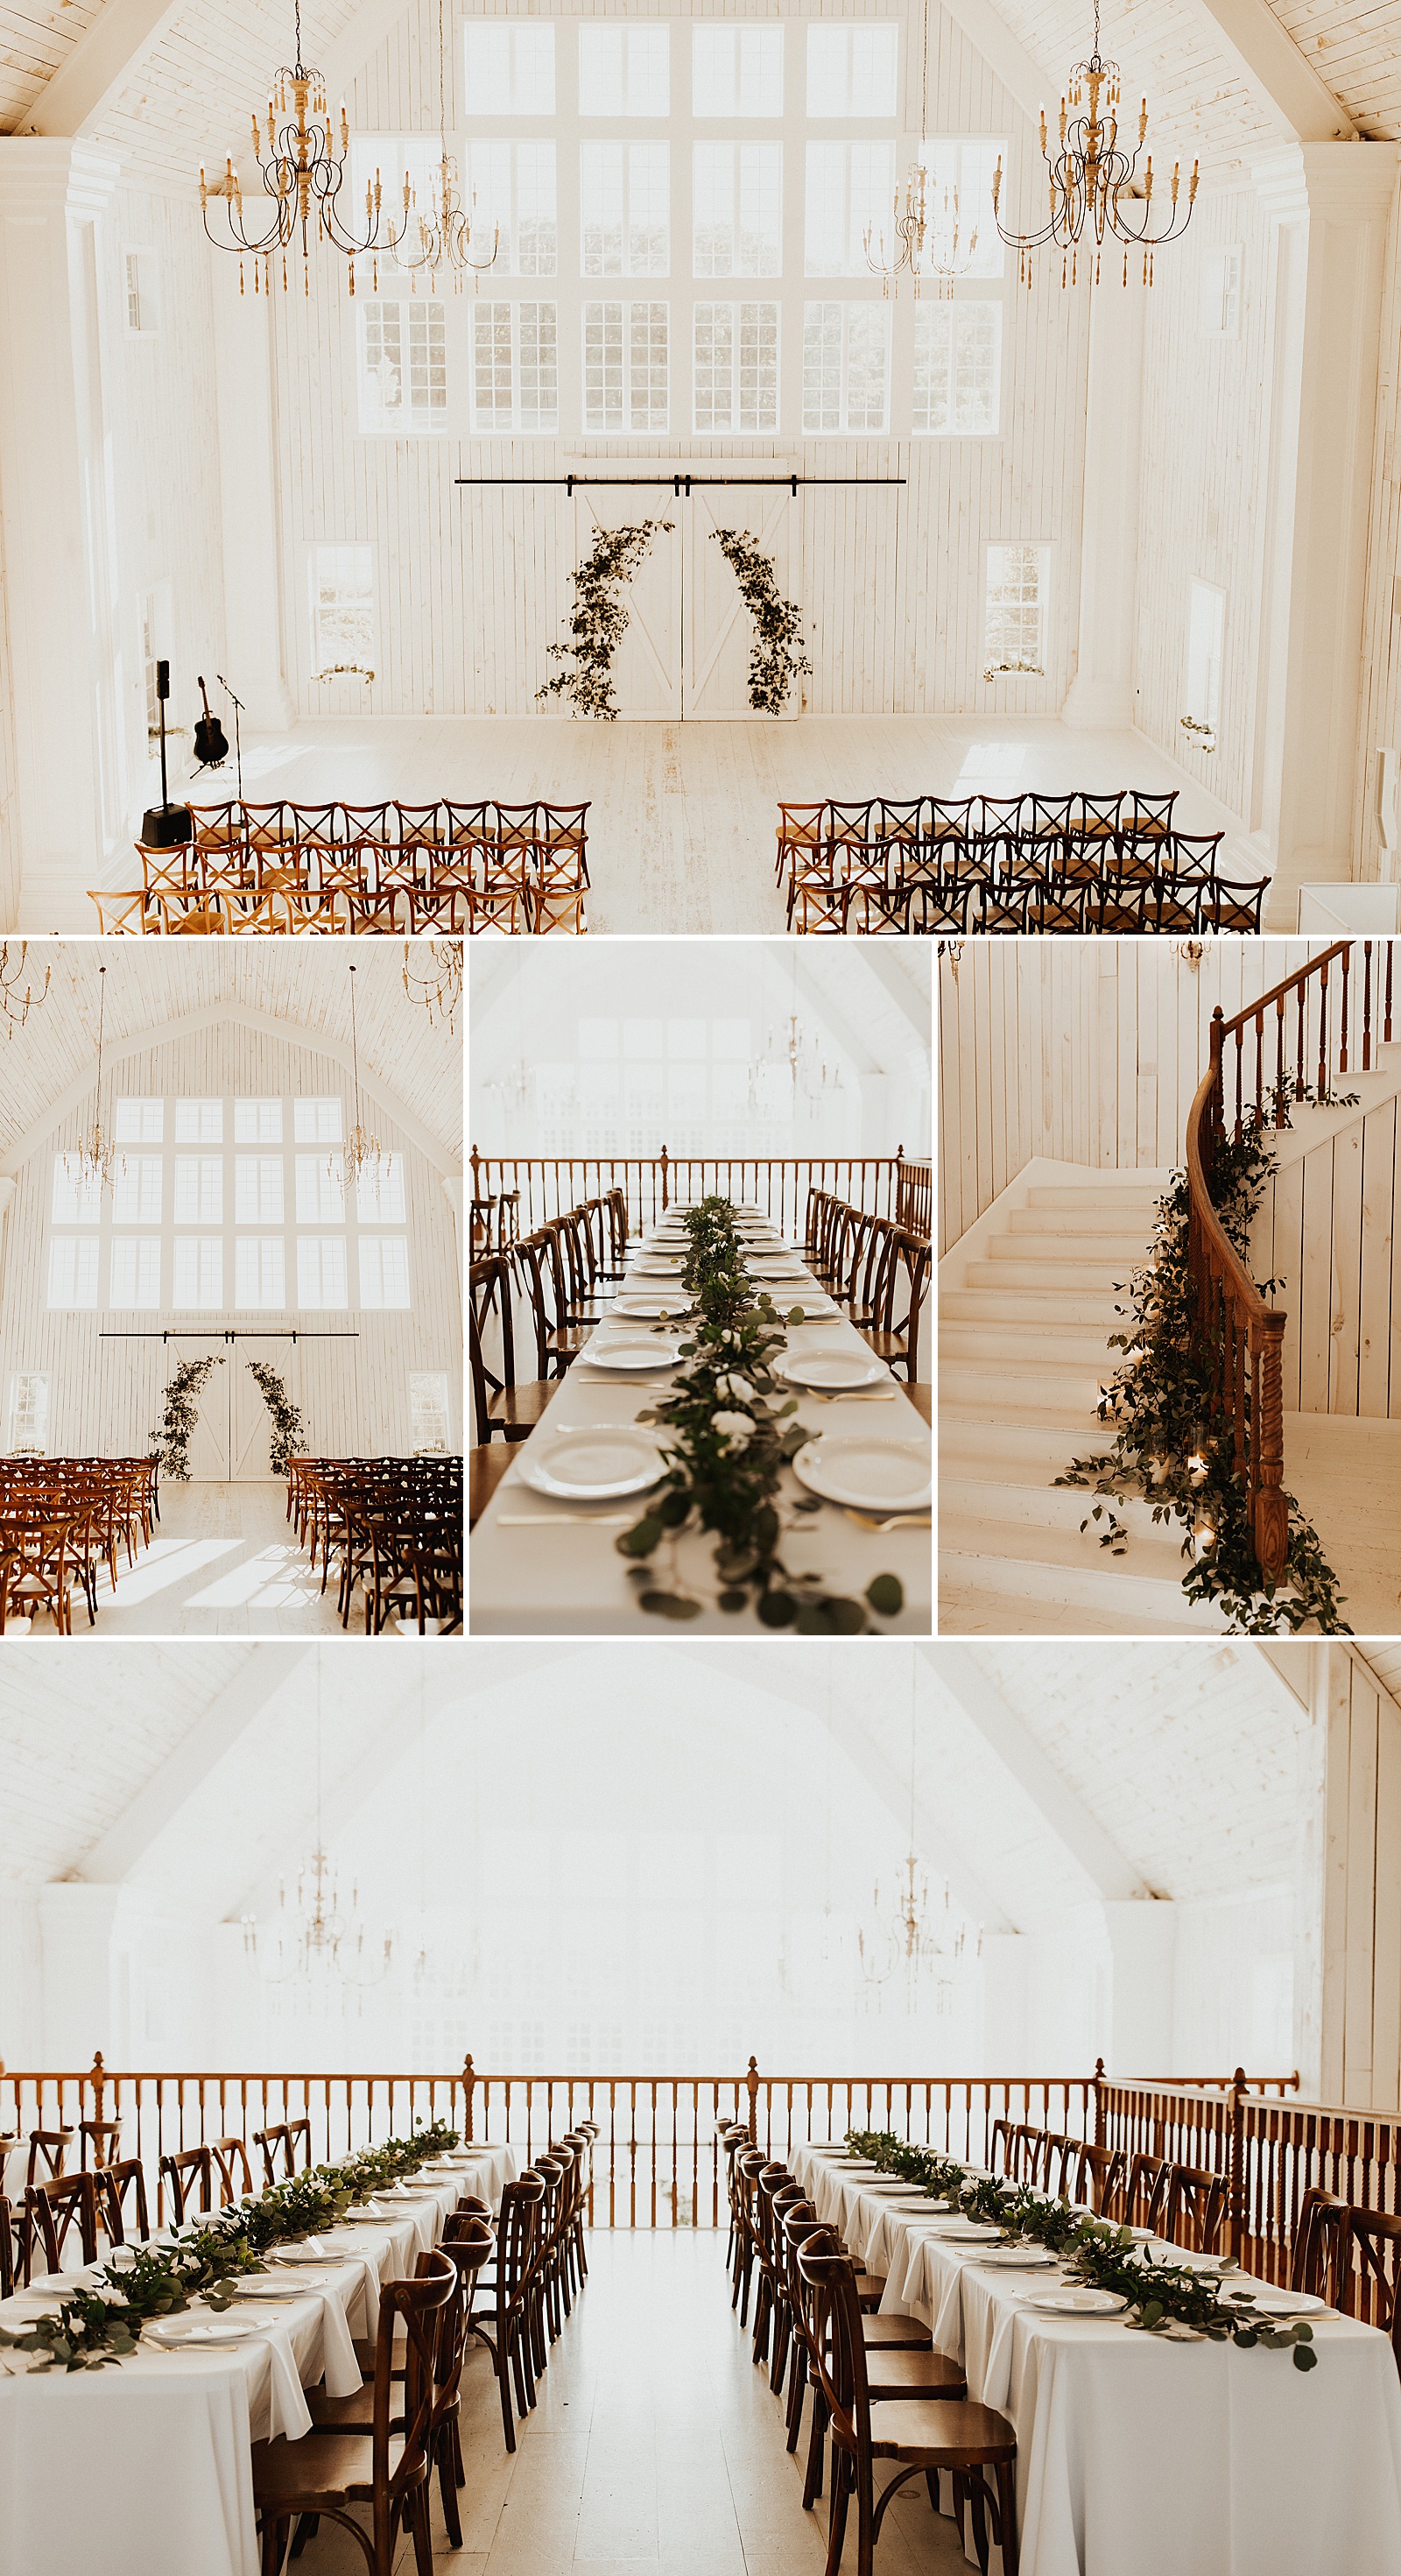 Photos of the most gorgeous wedding venue, The White Sparrow barn in Dallas, TX.